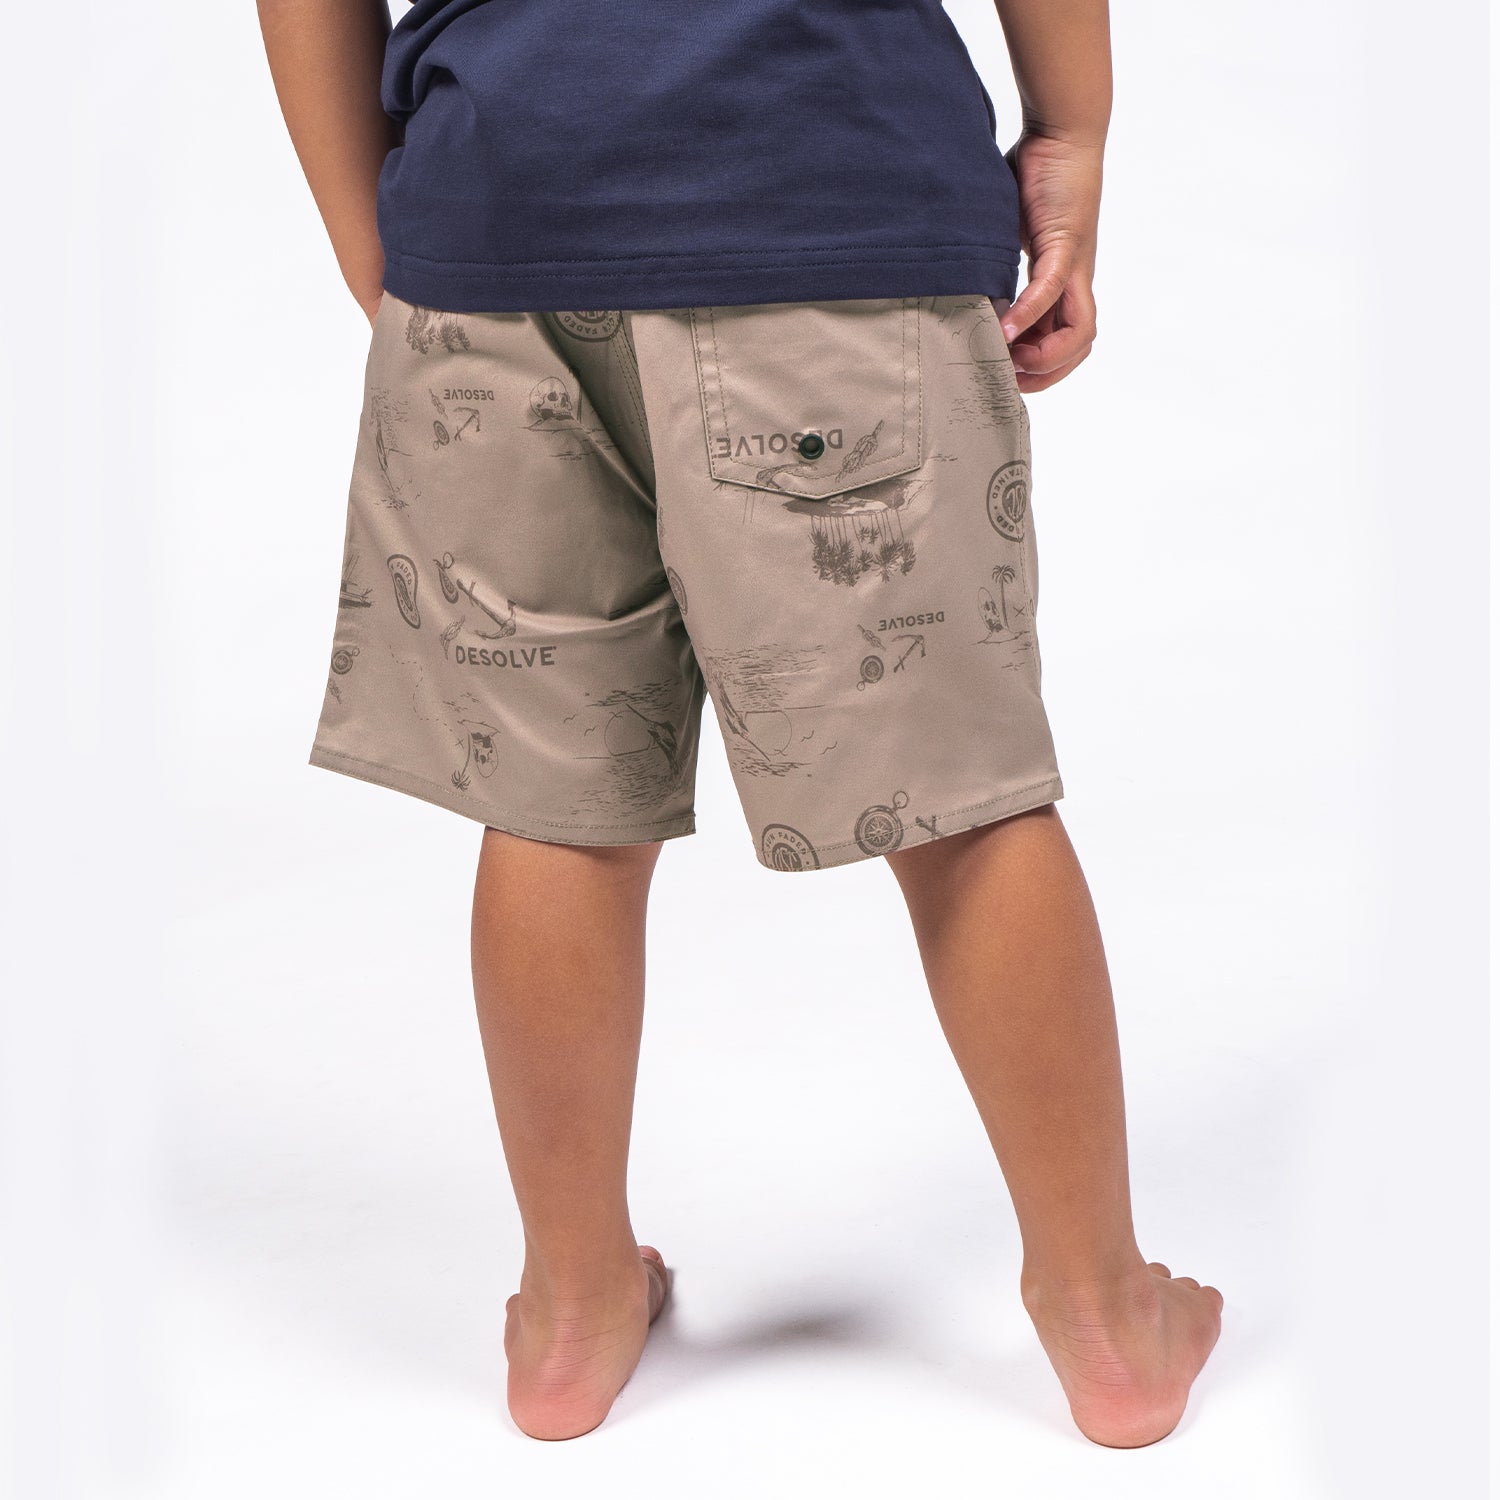 Atoll Harbour Shorts Kids